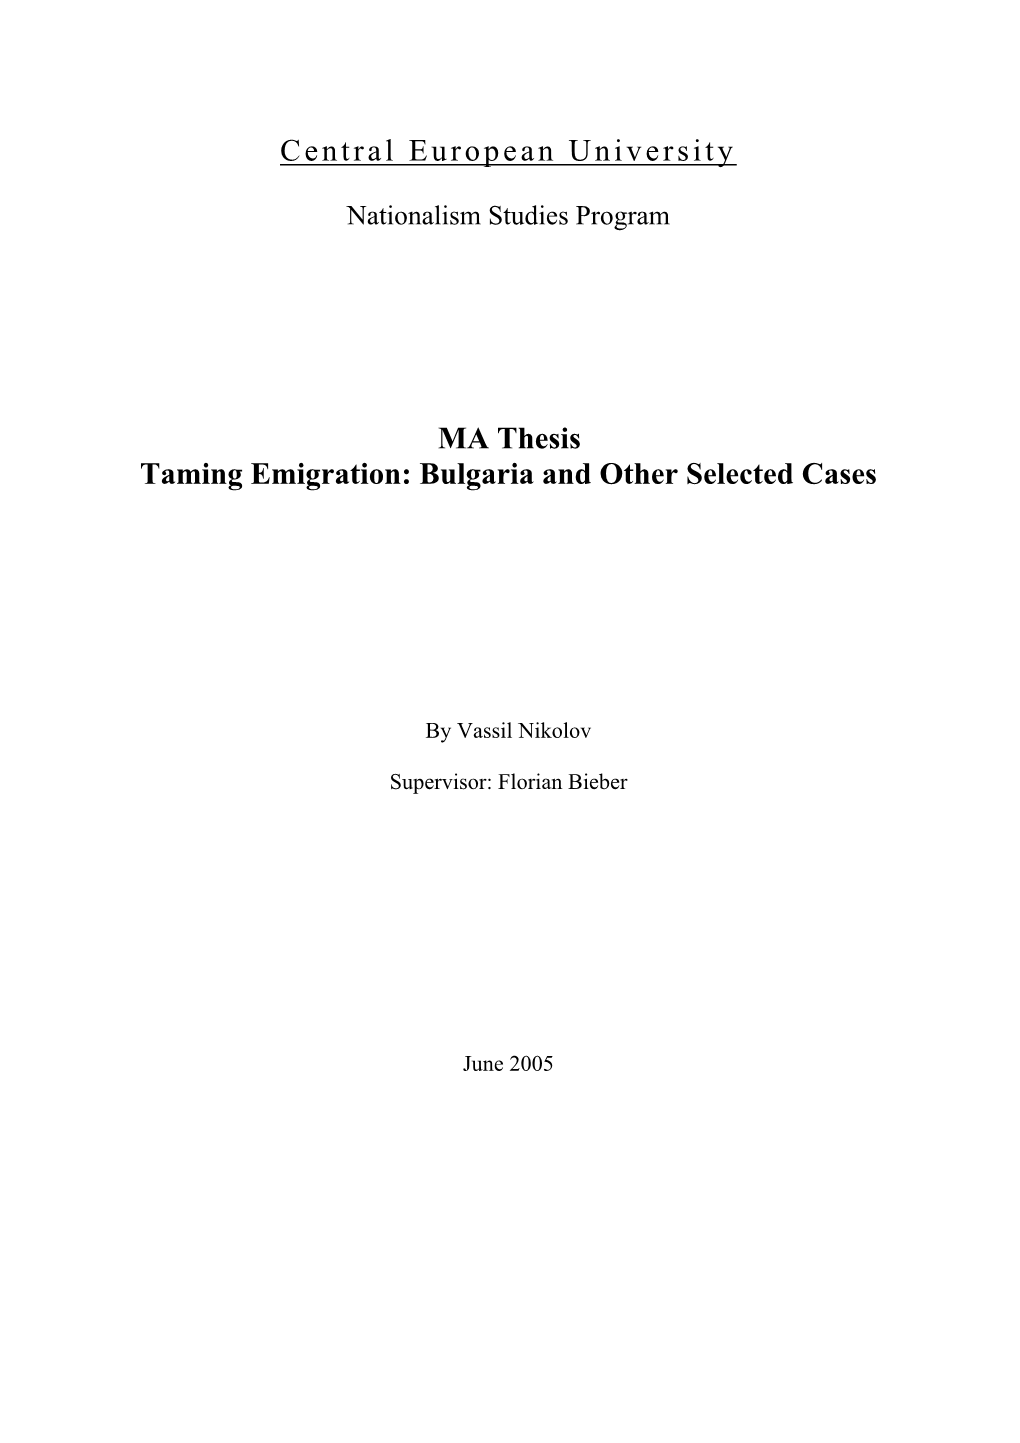 Central European University MA Thesis Taming Emigration